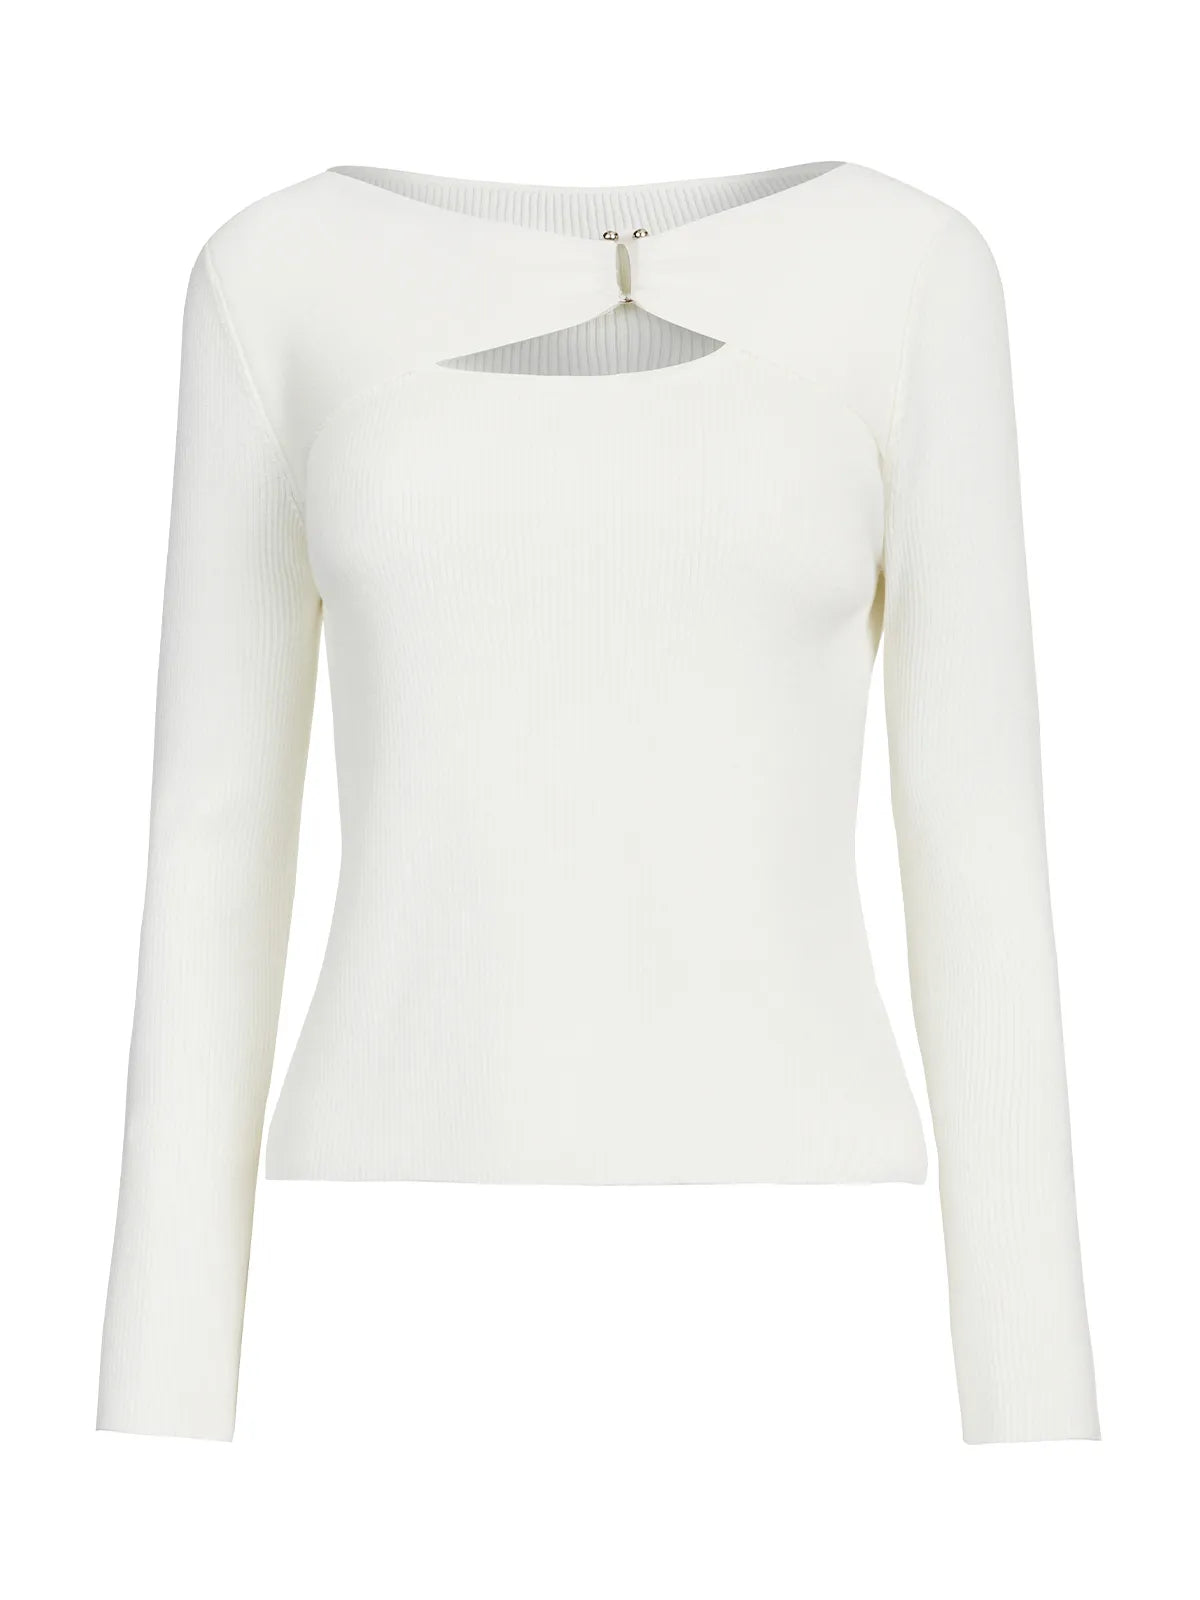 Contemporary White Knit Sweater with Sleek Silhouette